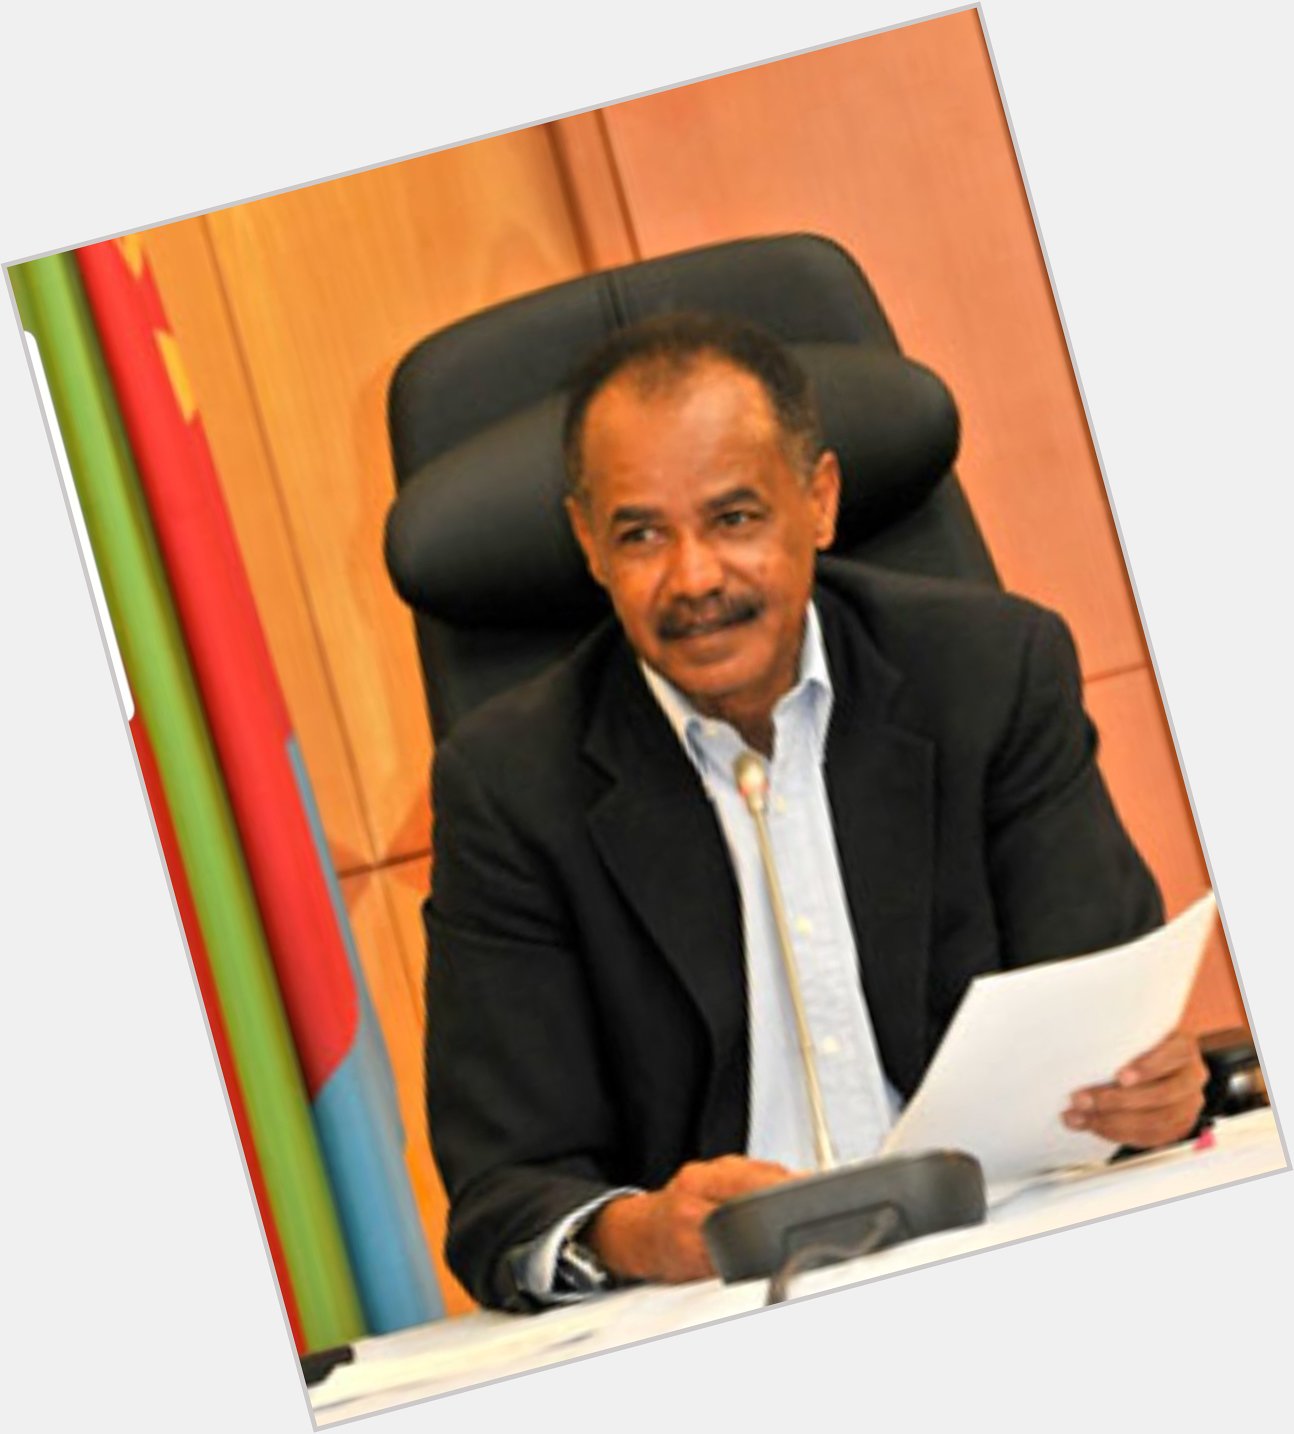 Wishing our beloved hero HE President Isaias Afwerki a happy birthday. 